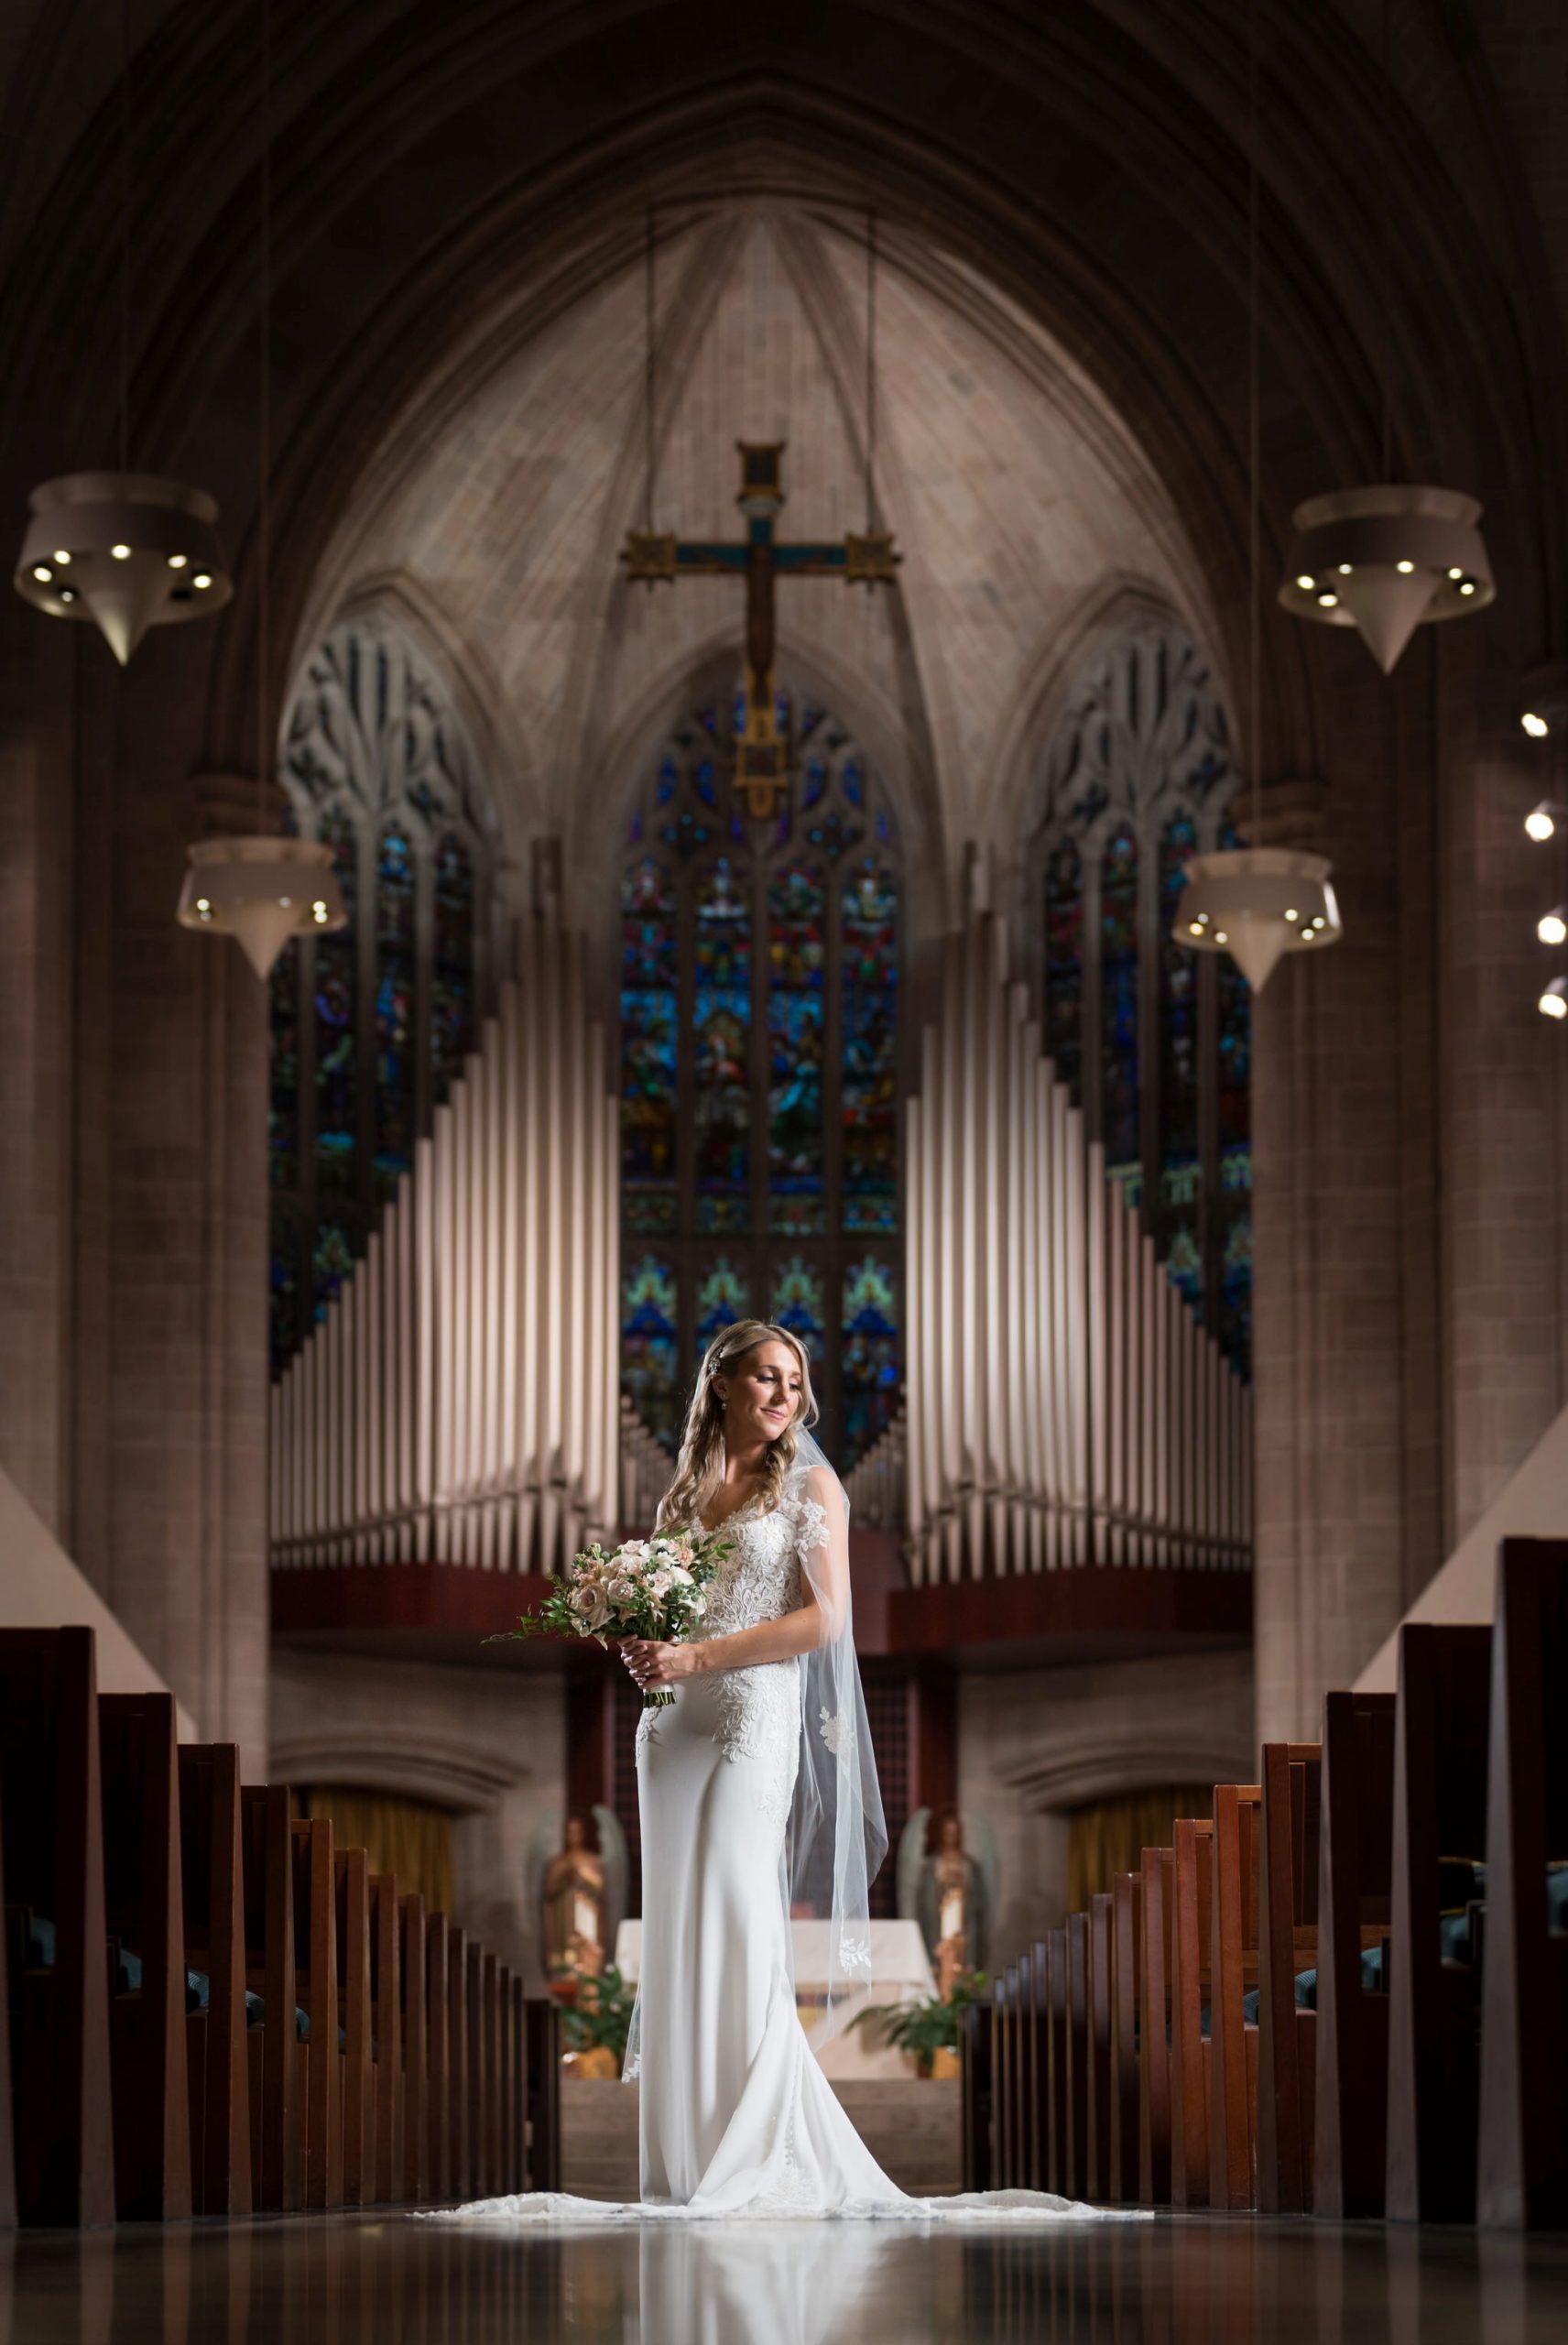 A bride poses in the aisle of the Cathedral of the Most Blessed Sacrament on her wedding day.  